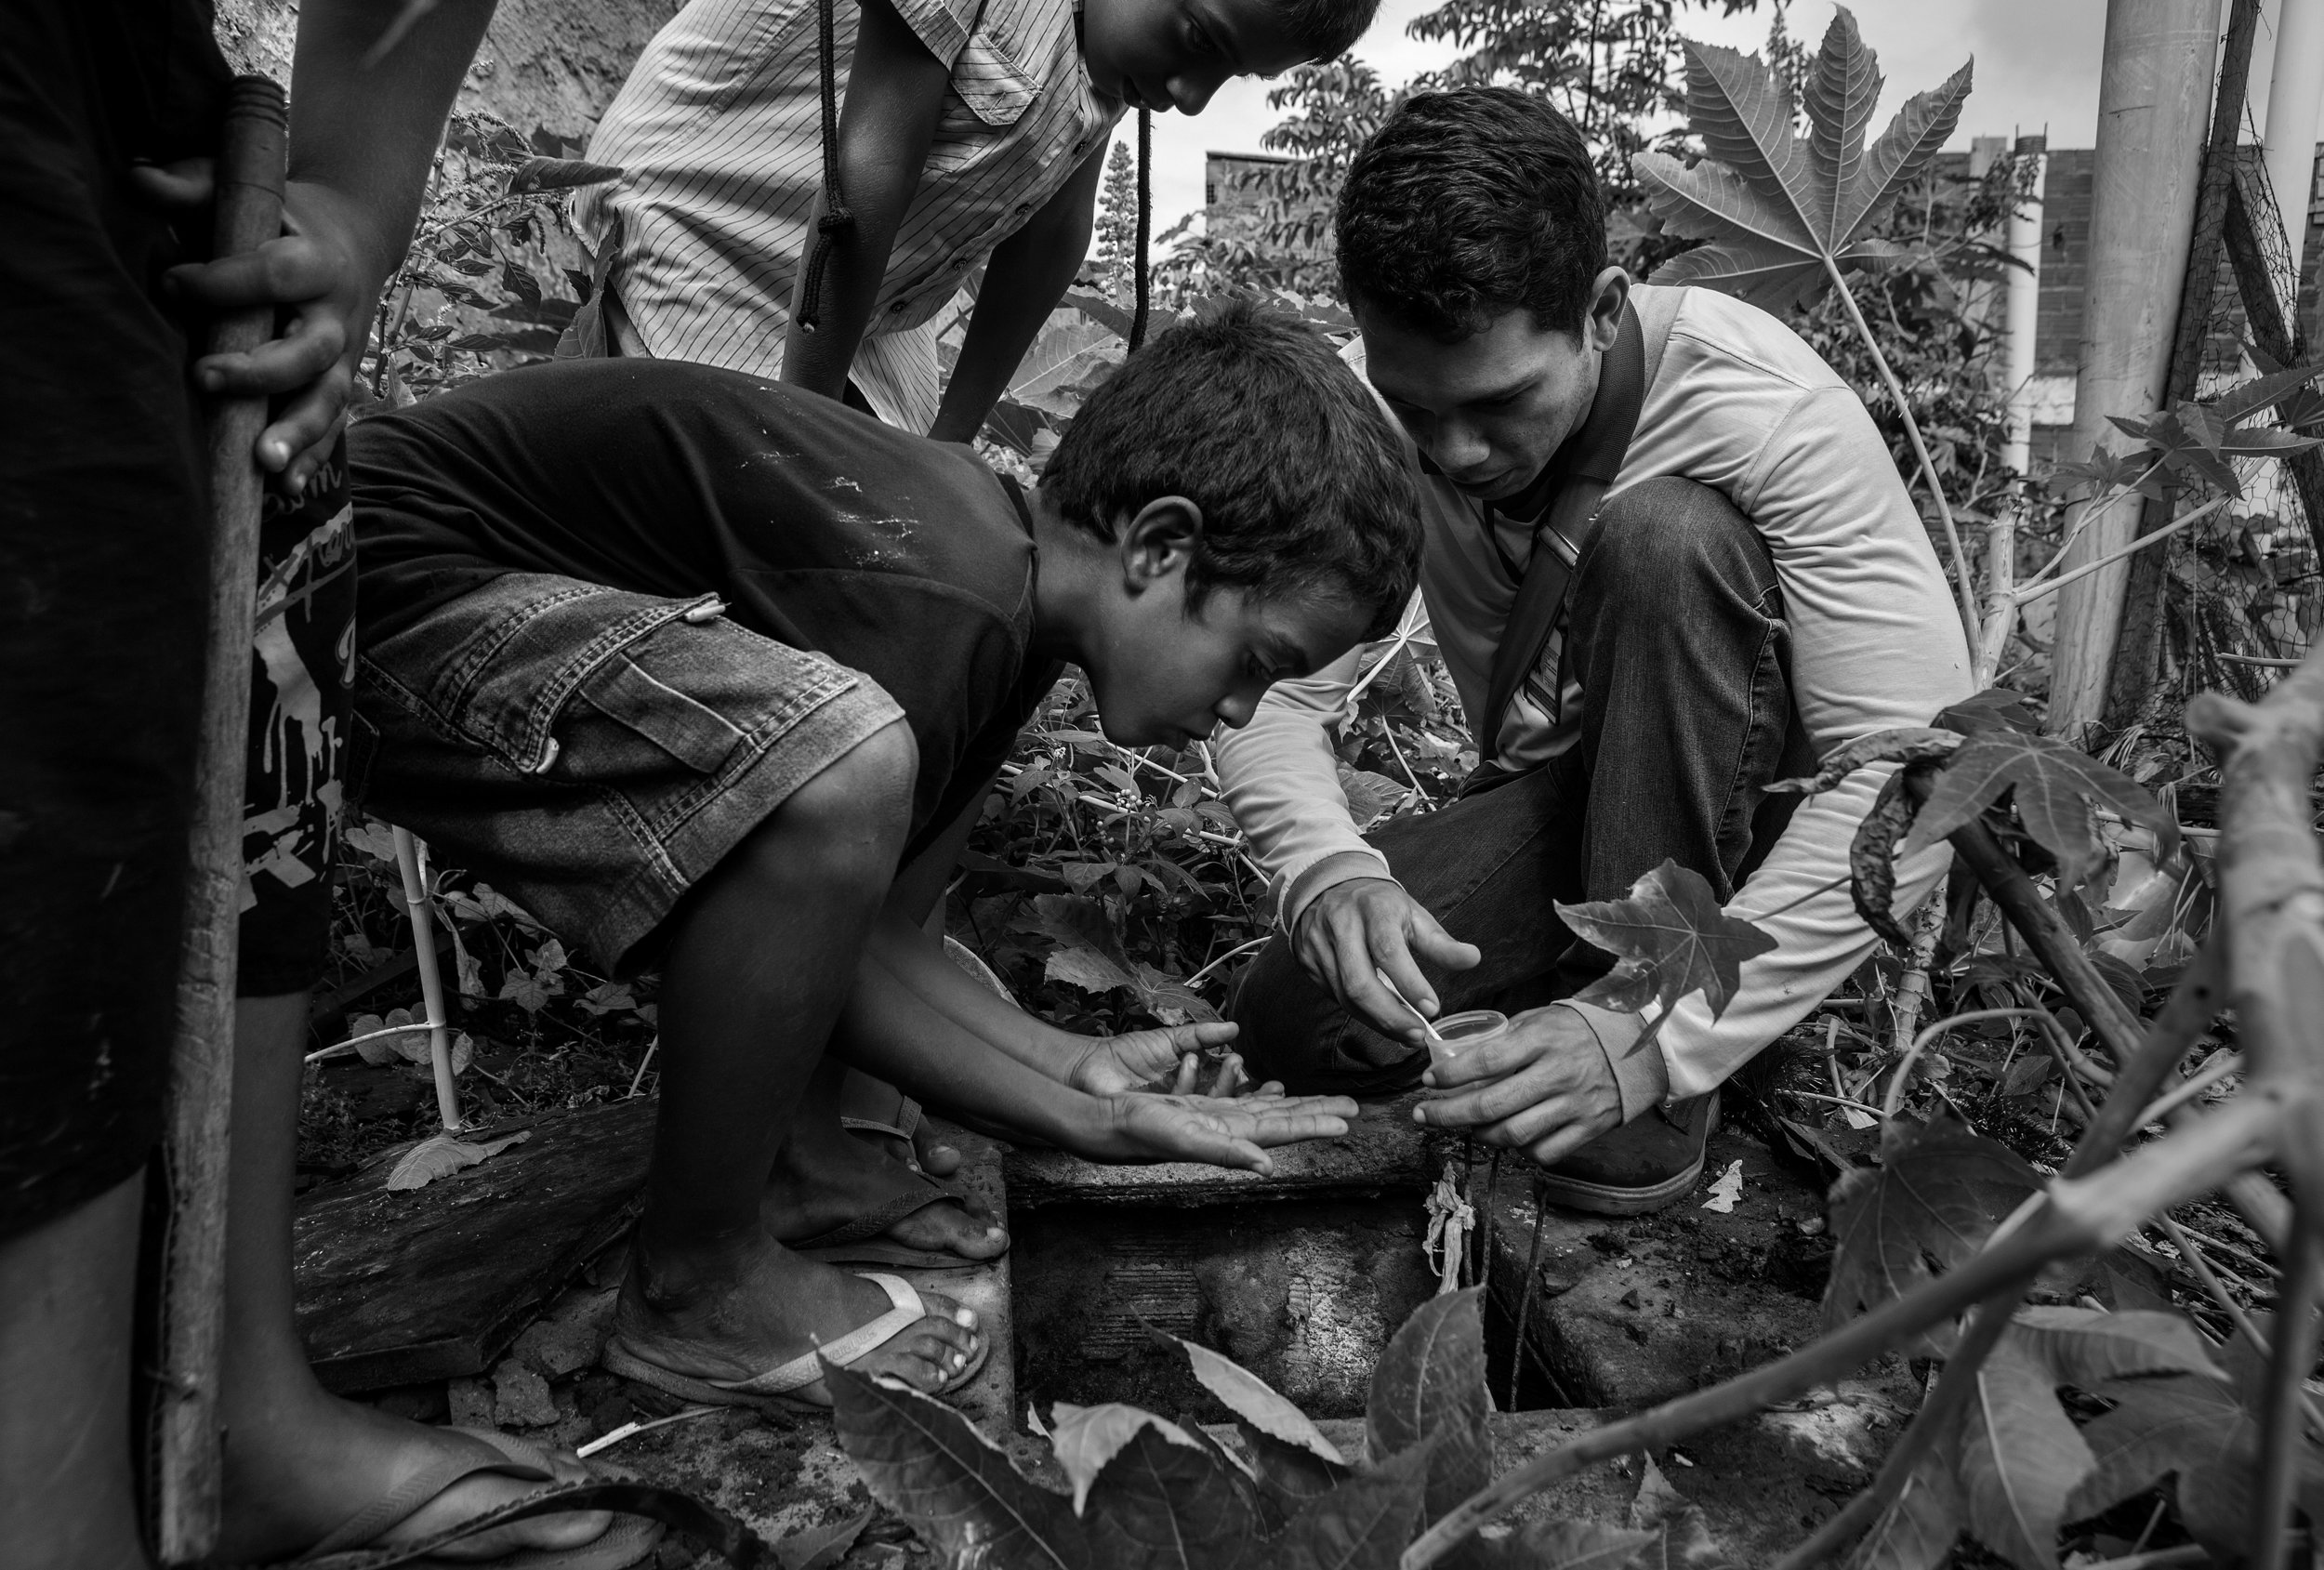  Children kill mosquitoes with their hands behind an abandoned home in an impoverished neighborhood of Campina Grande, as mosquito control agent Danilo de Cavalcanti, right, inspects and drops larvicide into a water hole teeming with mosquitoes and t